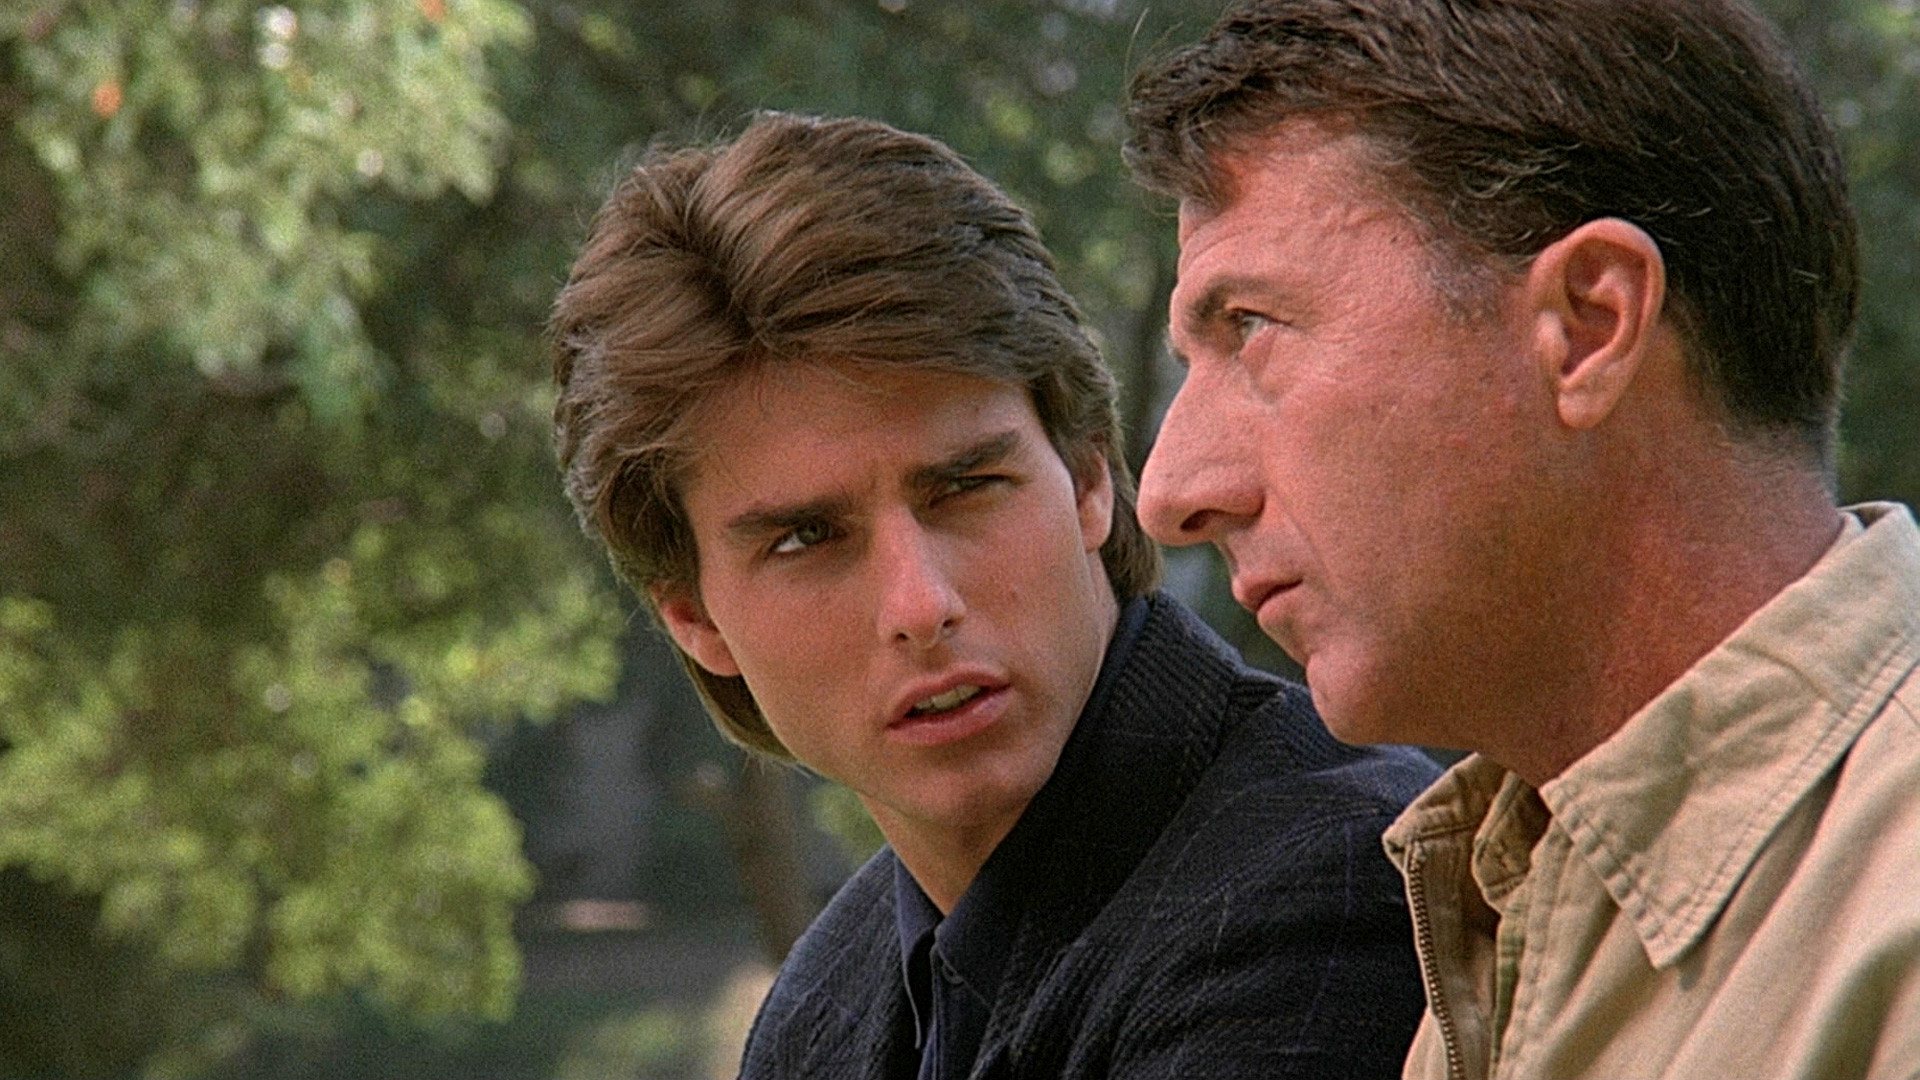 Tom Cruise talking to Dustin Hoffman, as Hoffman stares deadpan off into the distance.